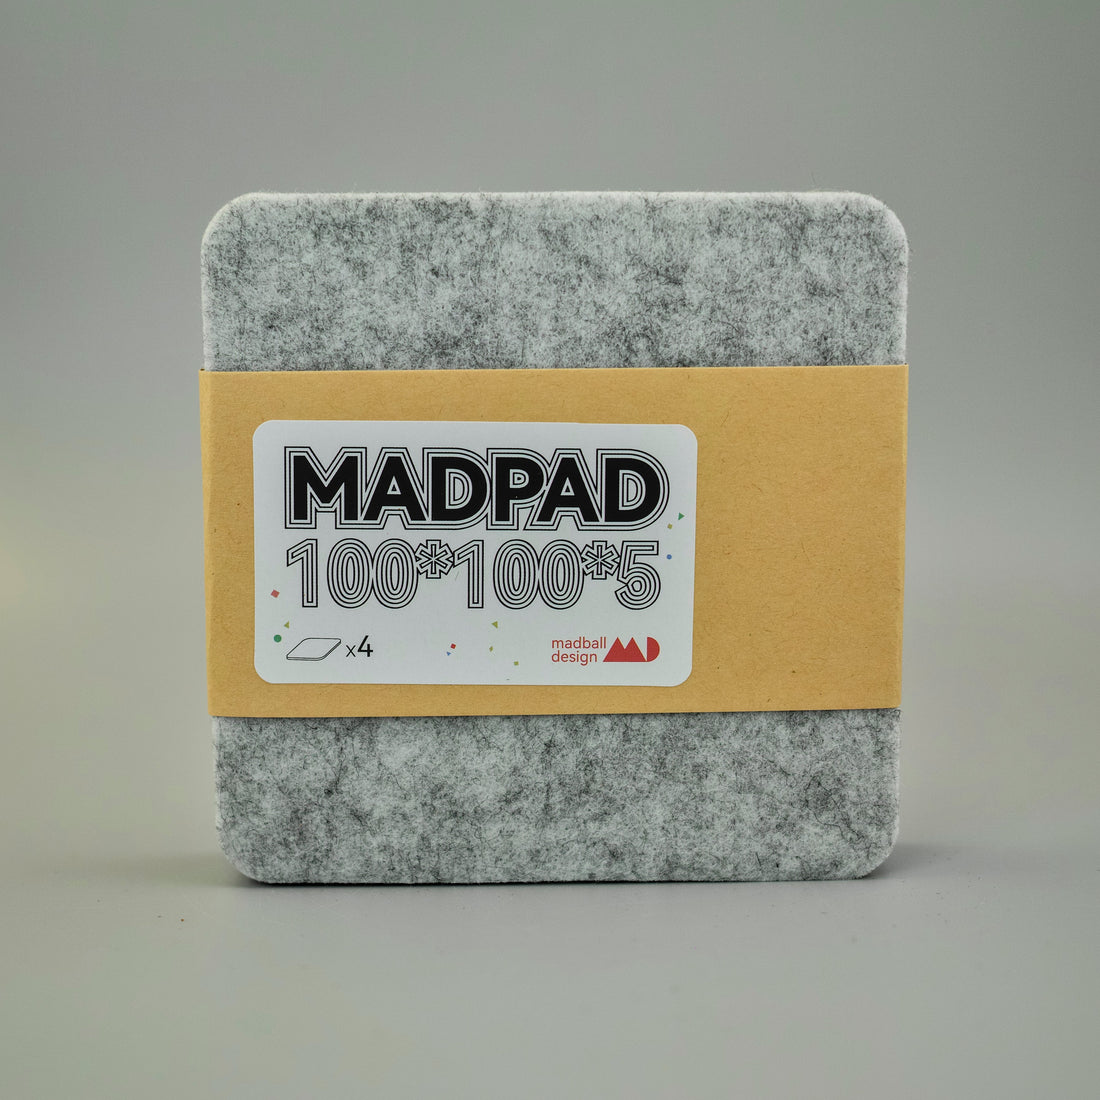 MADBALL Madpad Coffee Cup Absorbent Coasters 4 Packs - Pale White